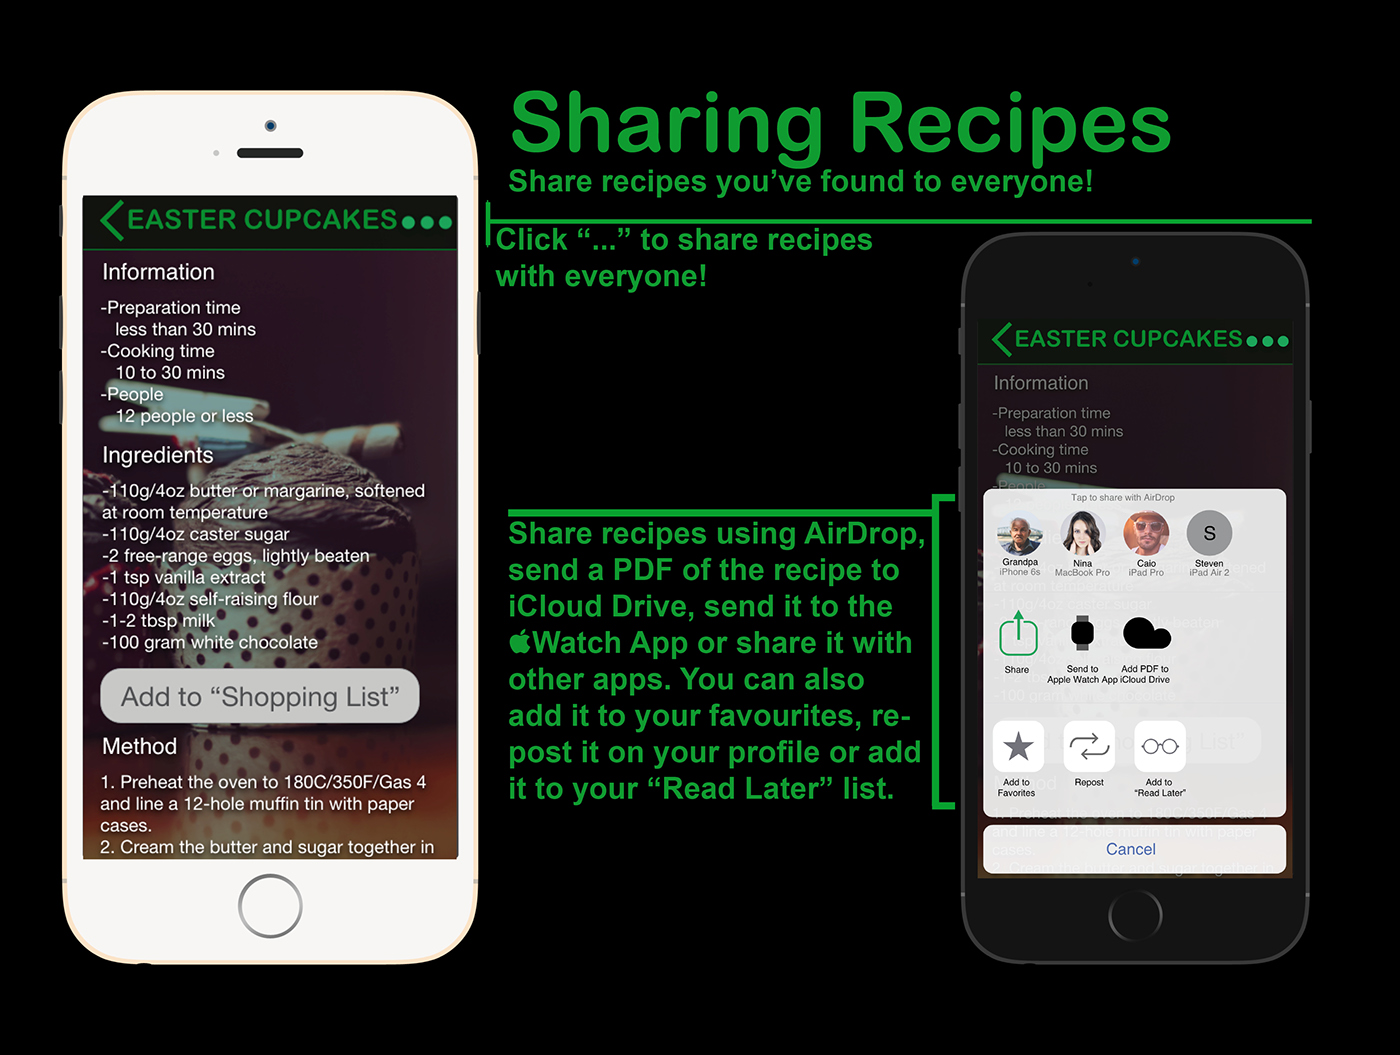 mobile iphone app Pleat plate design Icon cook recipe book community social netwerk network Collaboration